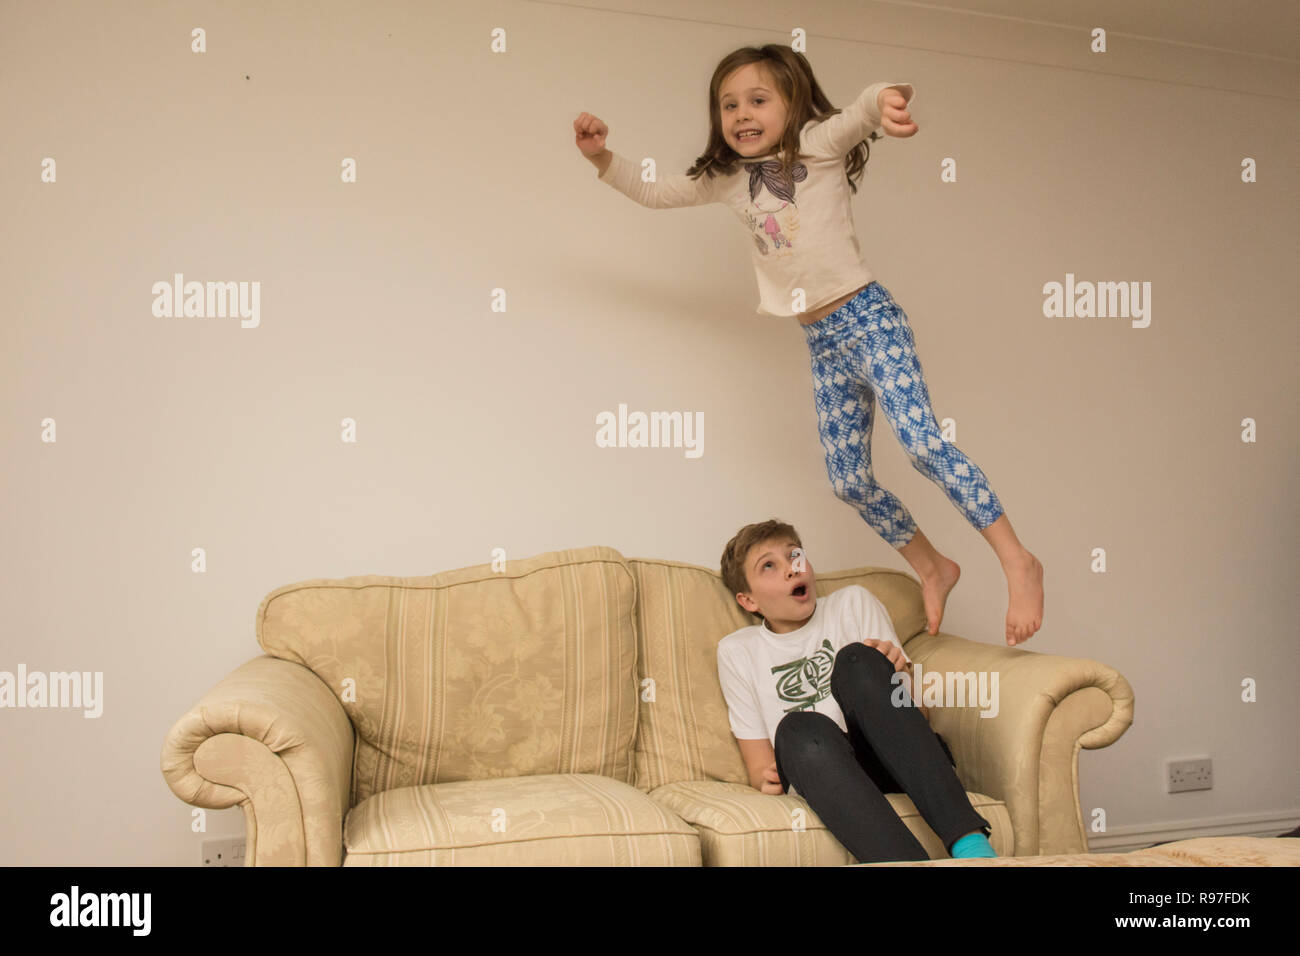 children, brother and sister jumping about on furniture, diving and leaping, being hyperactive, lots of energy, playing together Stock Photo